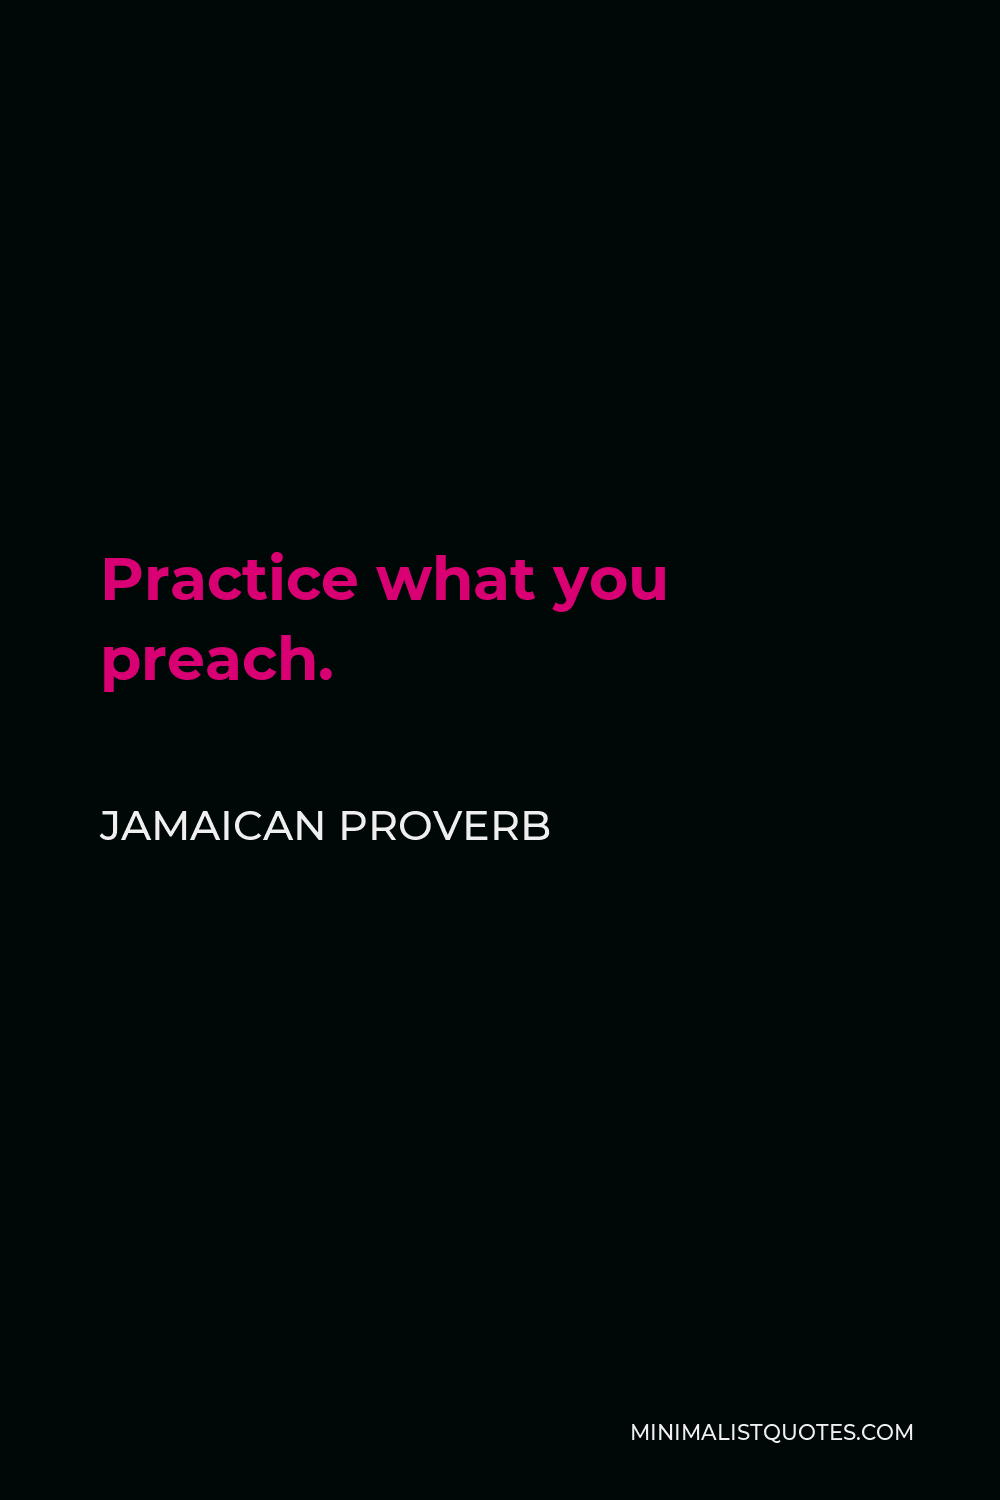 Jamaican Proverb Quote - Practice what you preach.